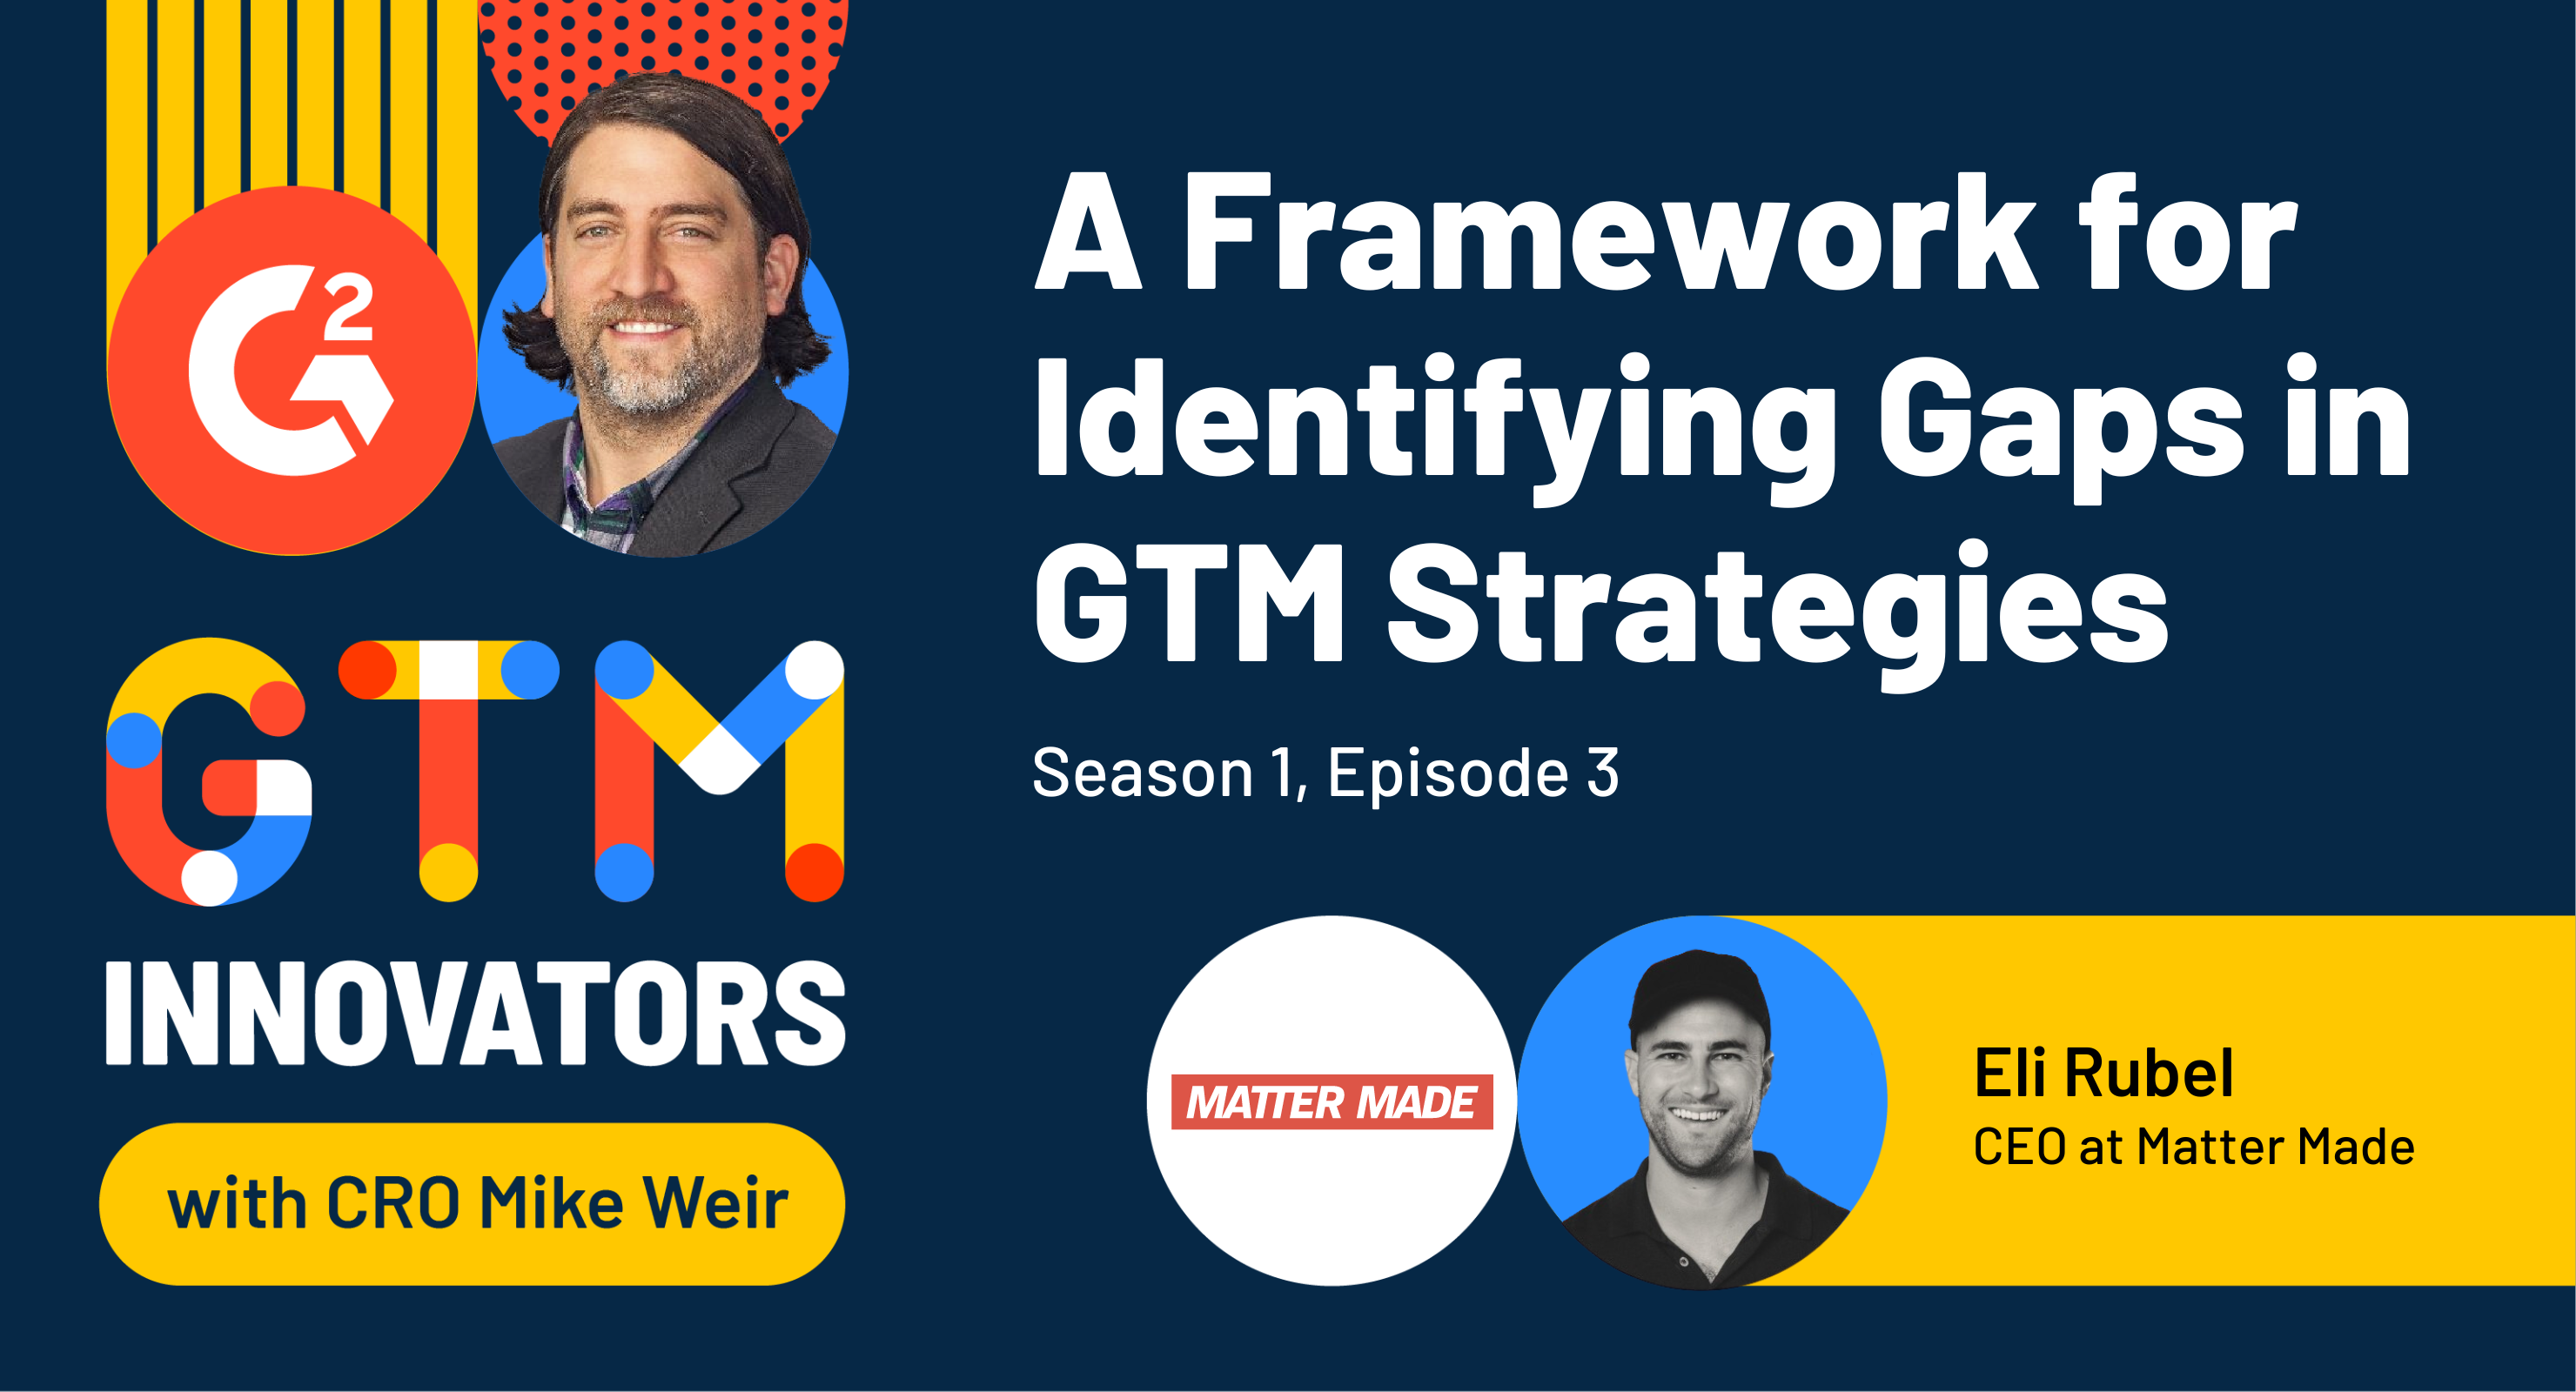 Eli Rubel’s Framework to Uncover and Overcome Frequent GTM Pitfalls